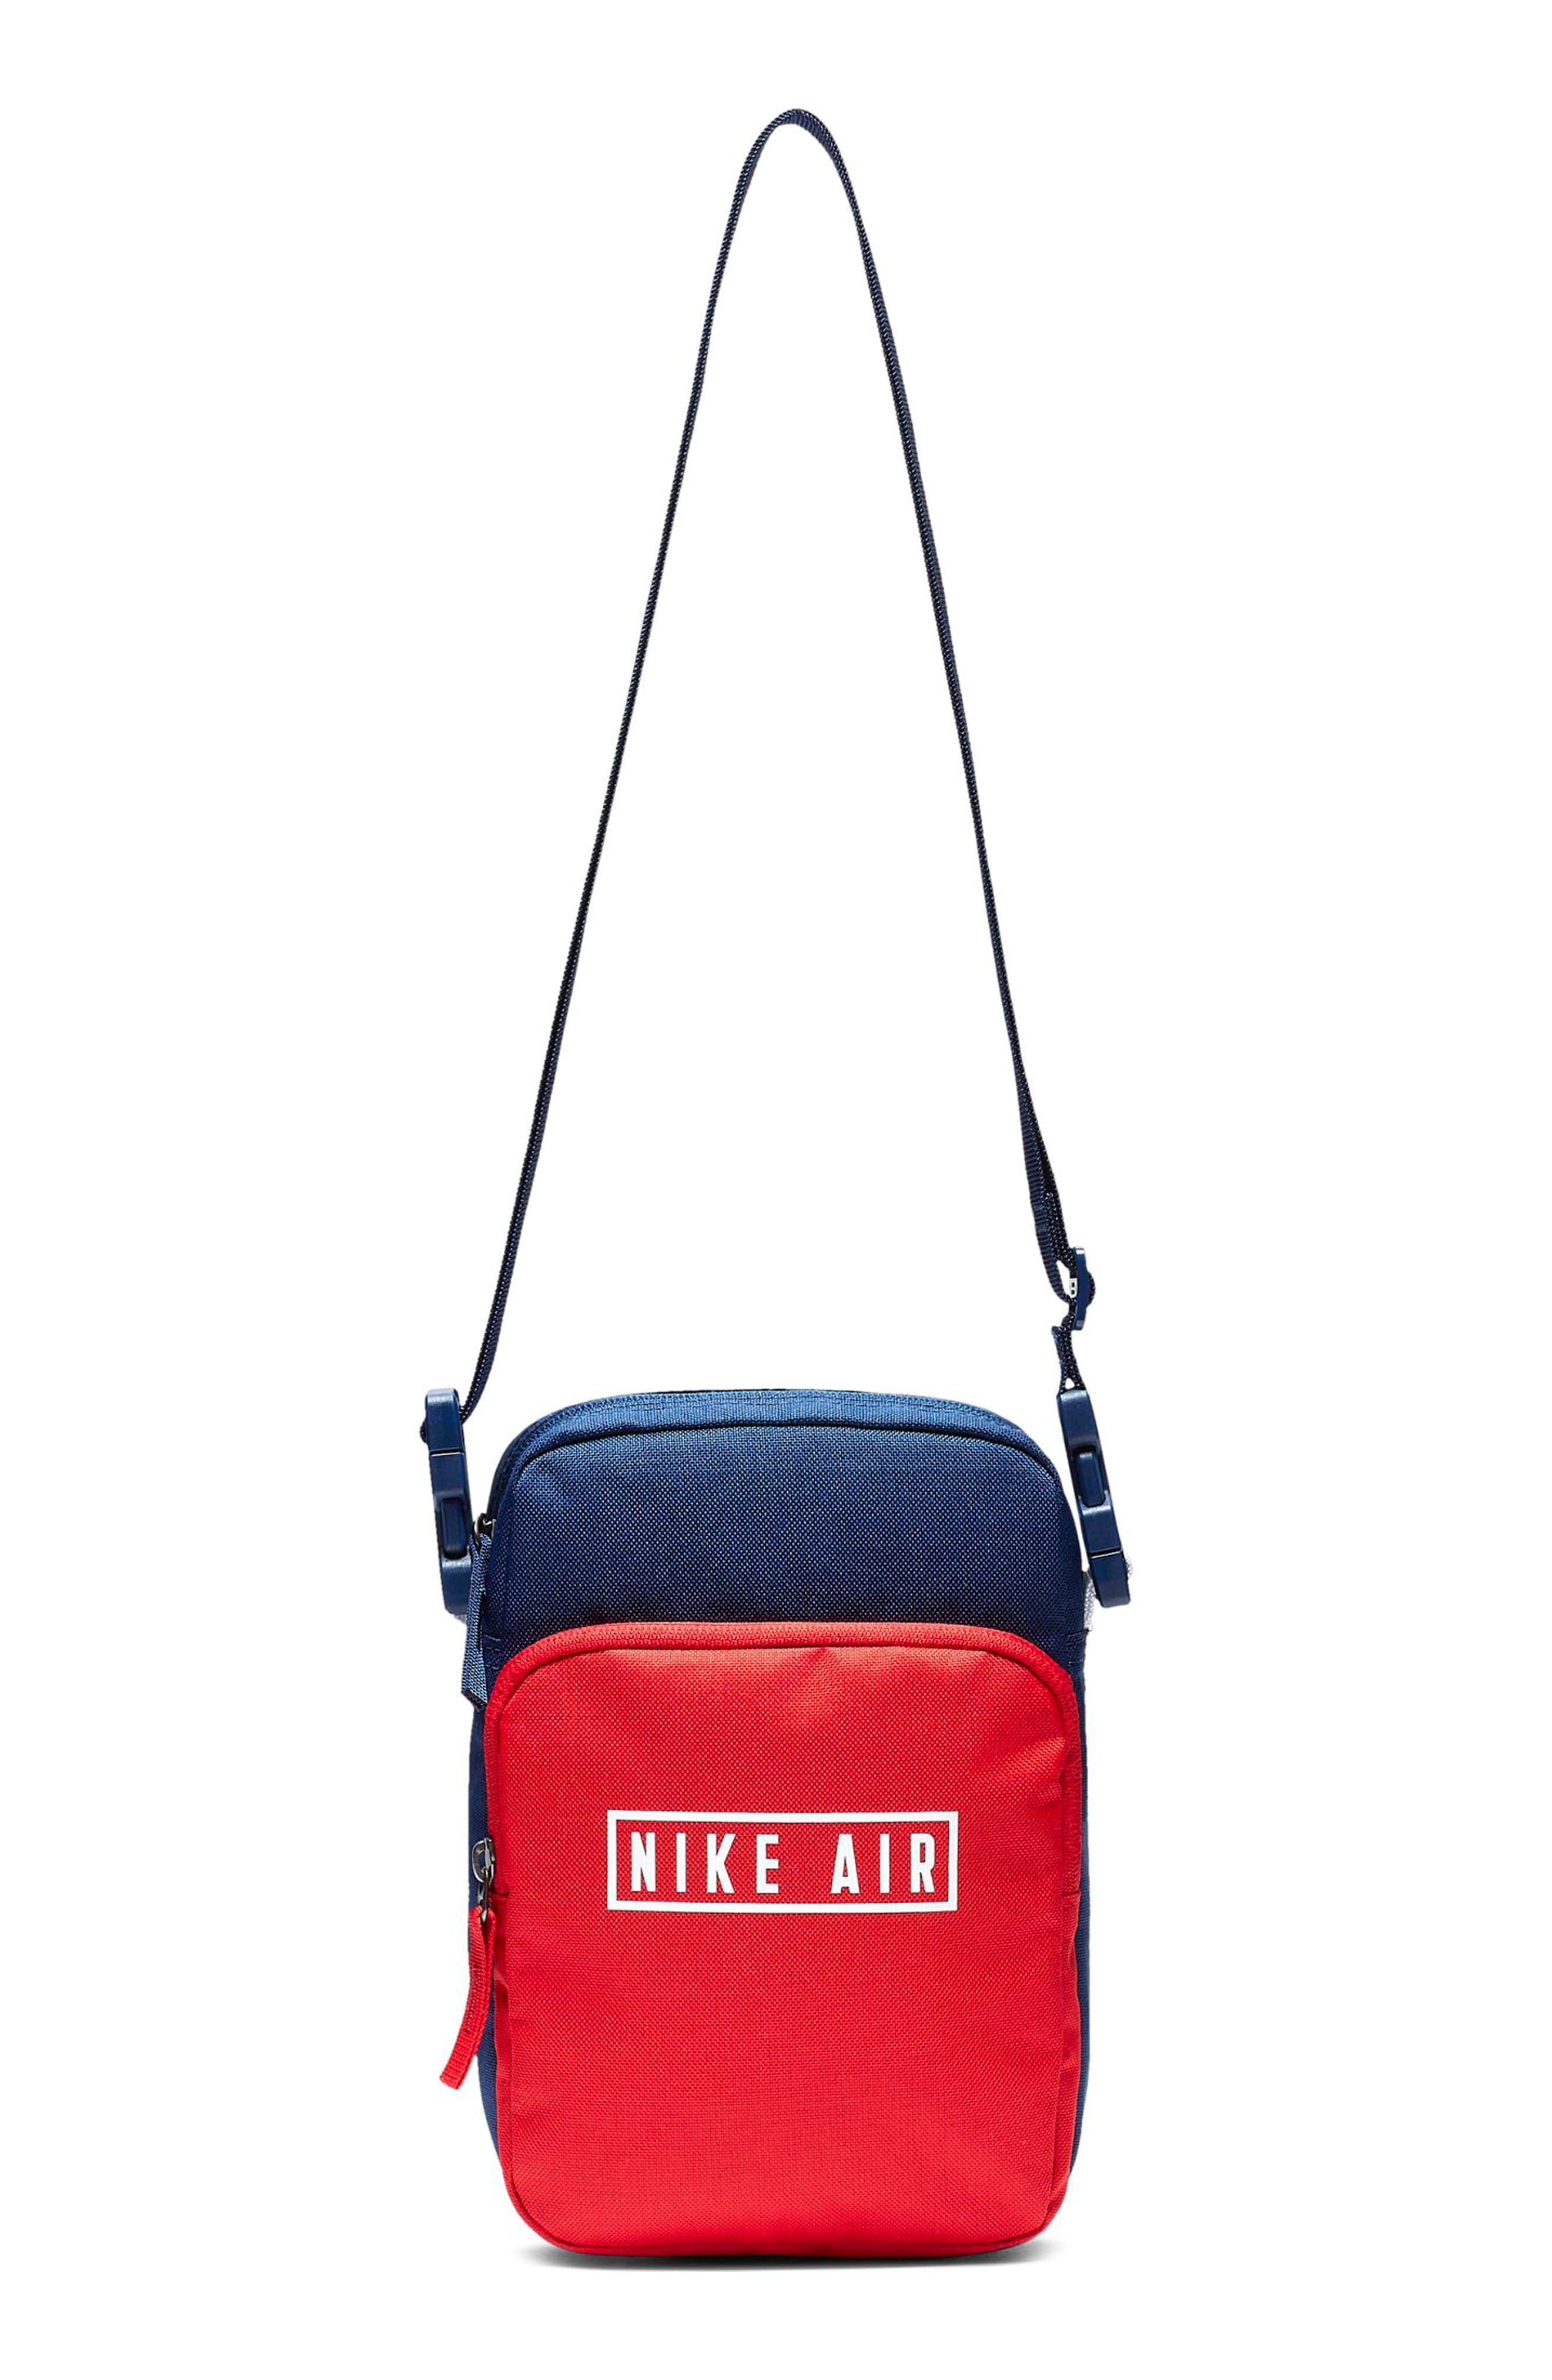 Nike Air Heritage 2.0 Colorblock Canvas Crossbody Bag in Blue - Lyst